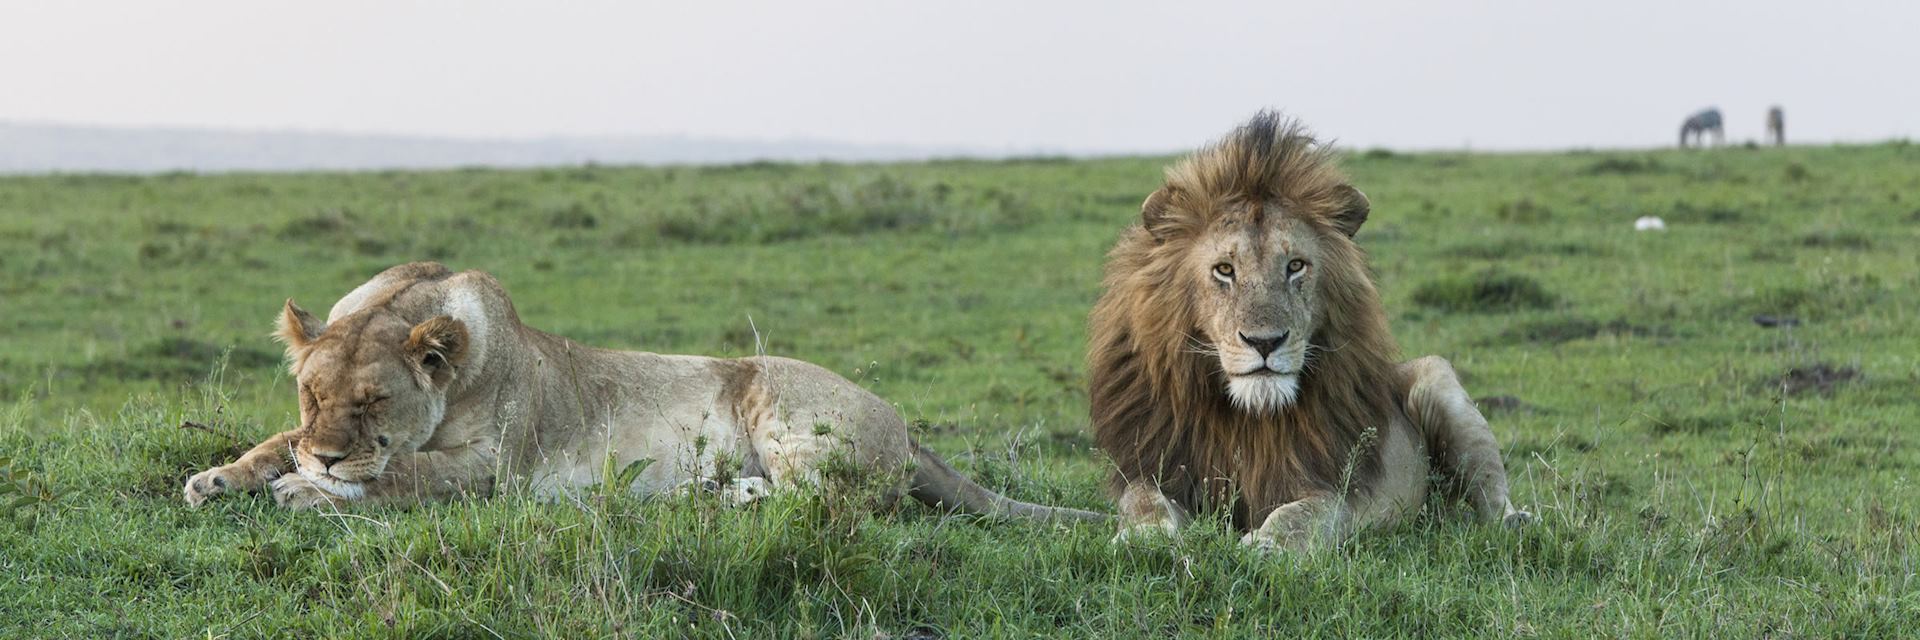 Visit Mara North Conservancy, Kenya | Tailor-made Trips | Audley Travel